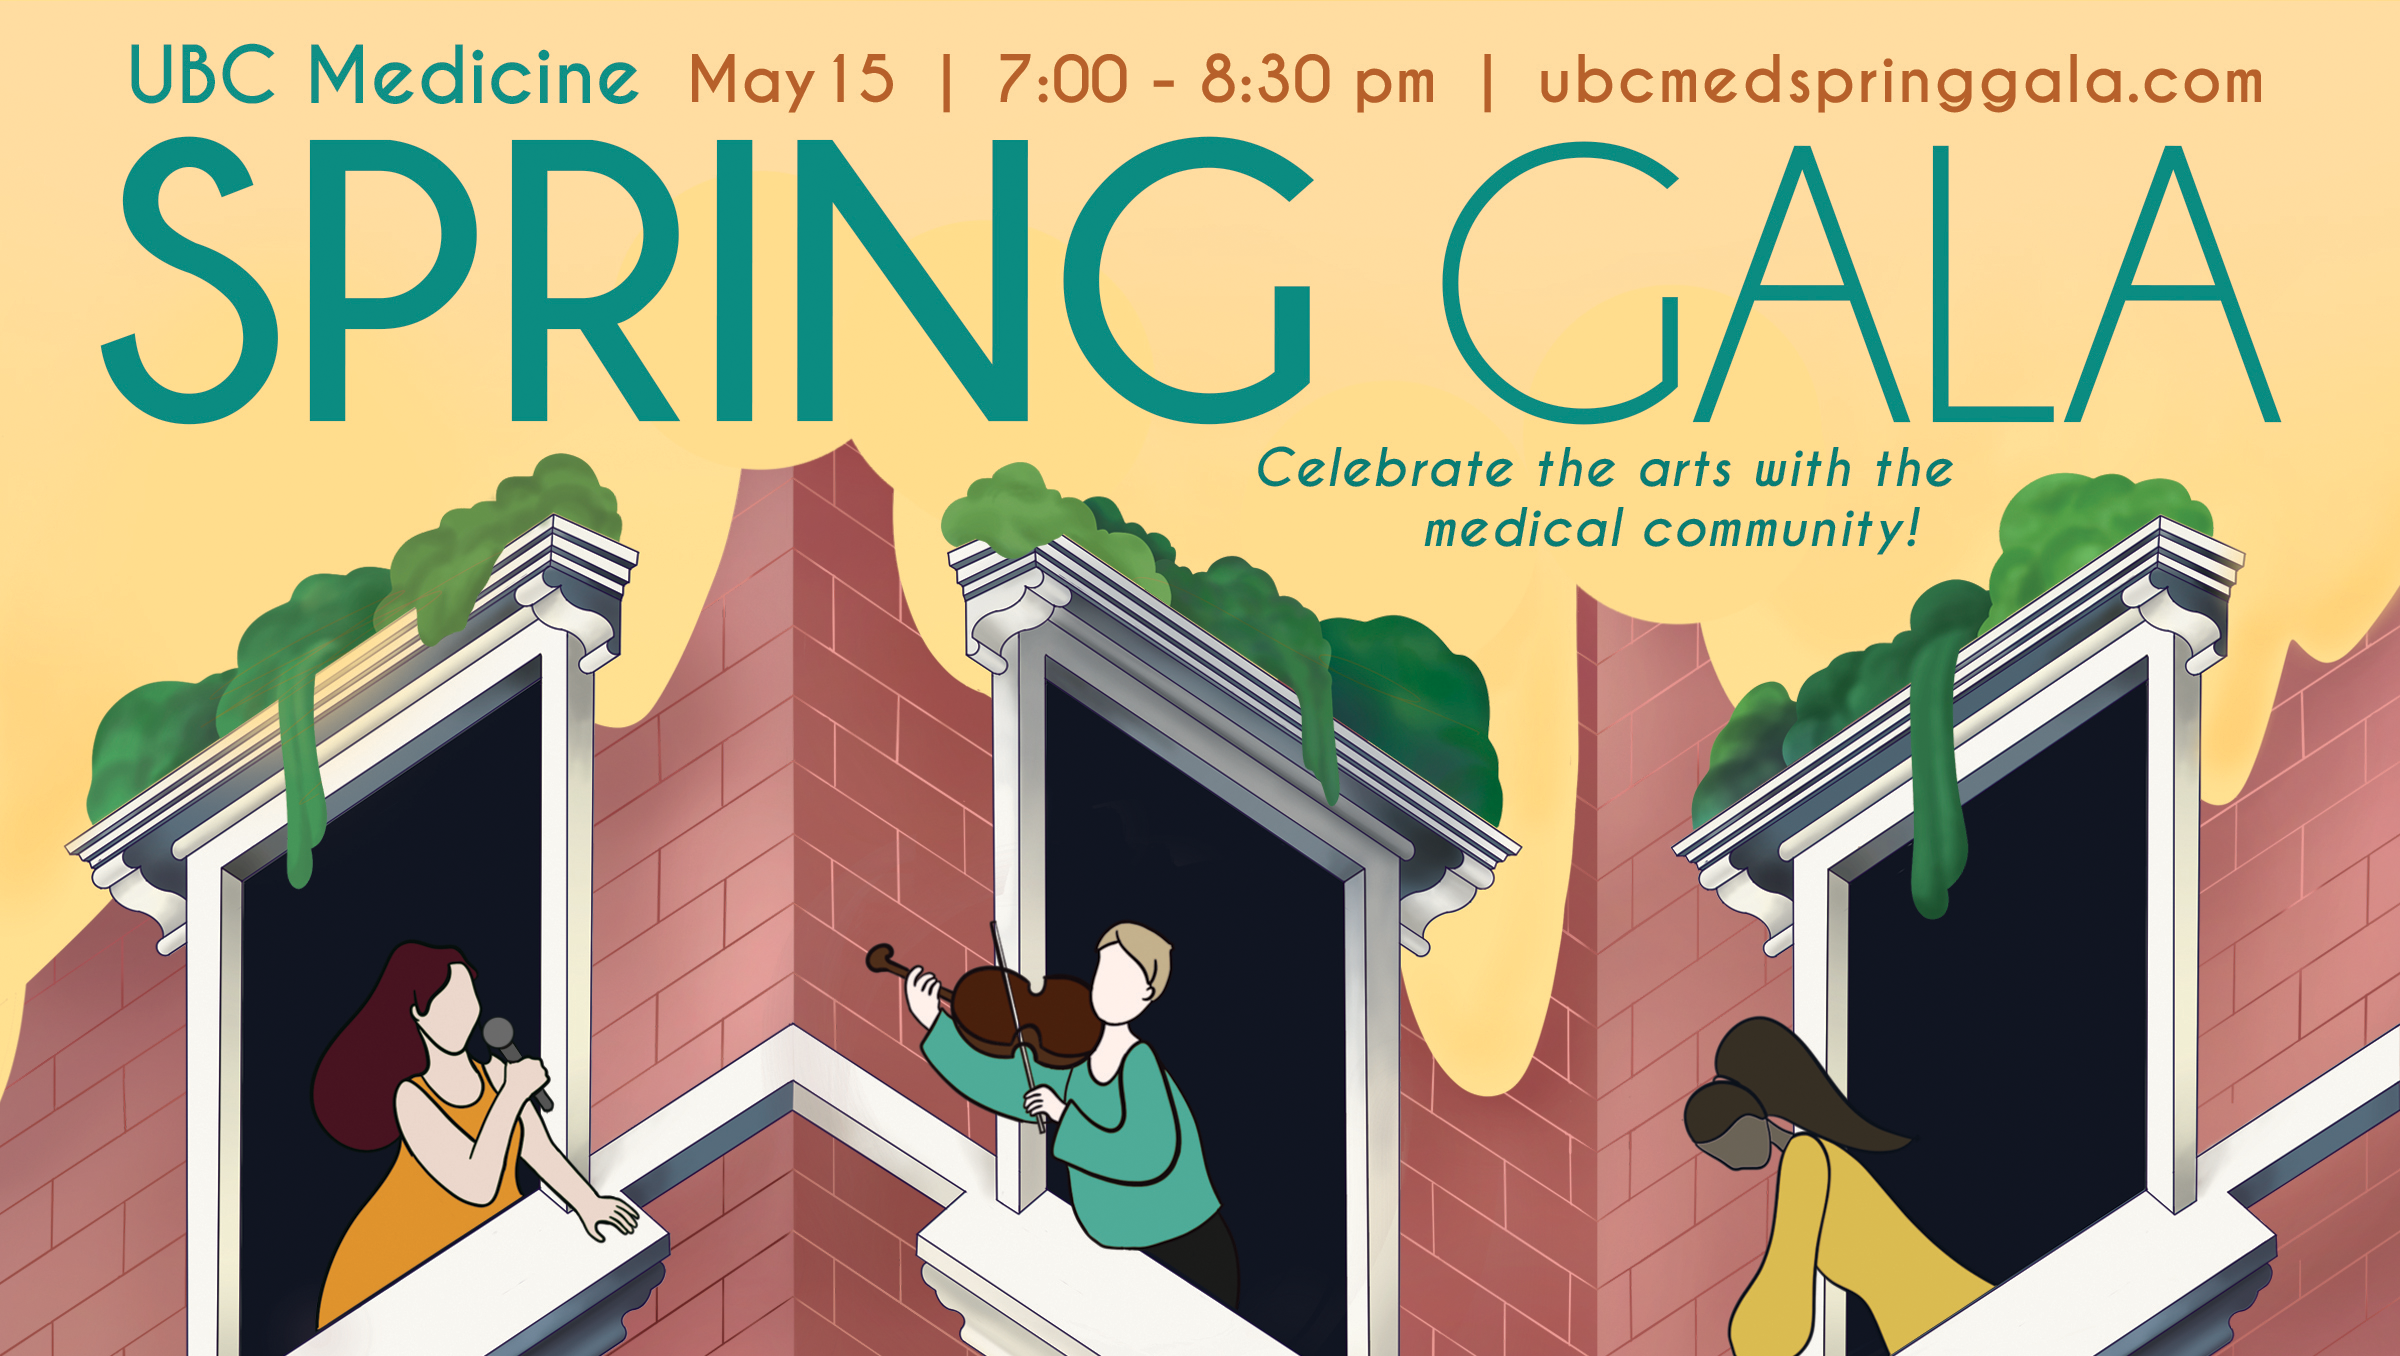 An ad with the words "Spring Gala" and people leaning out of apartment windows singing and playing a violin